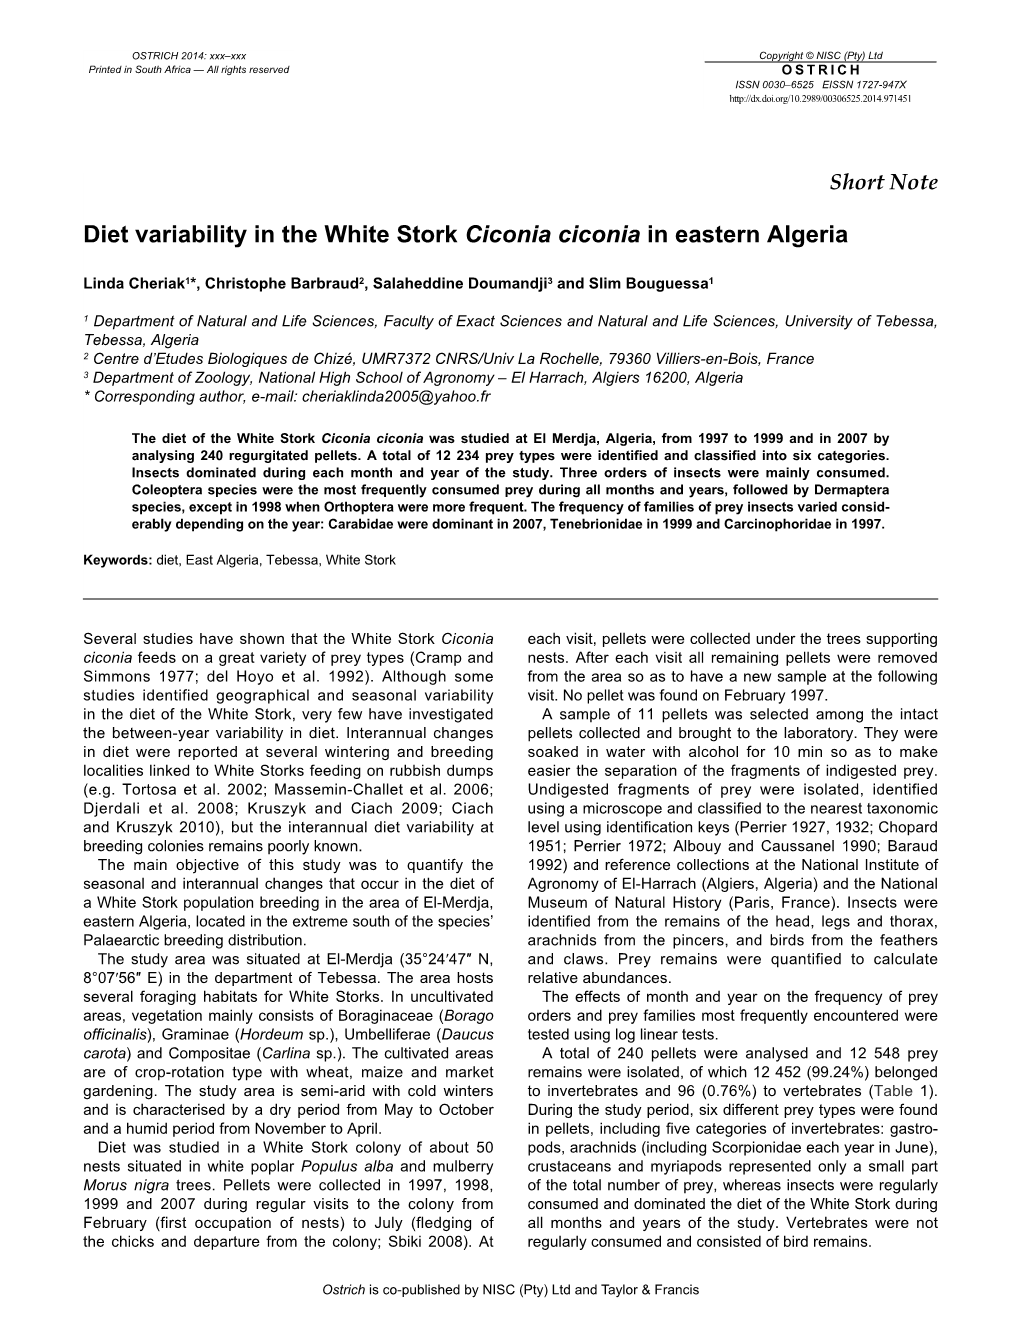 Diet Variability in the White Stork Ciconia Ciconia in Eastern Algeria